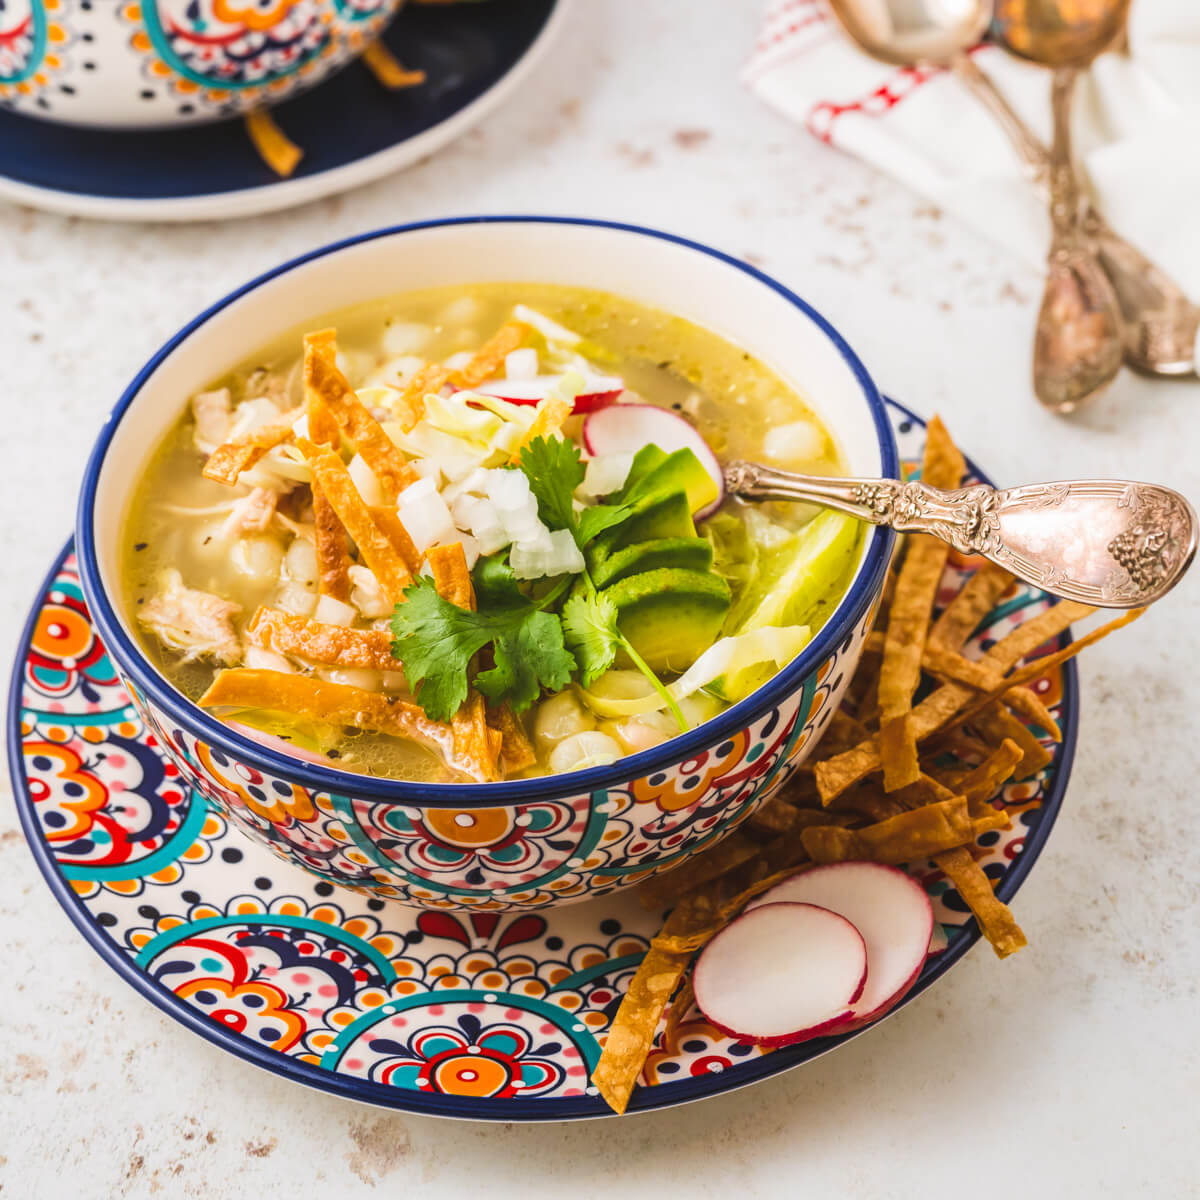 A colourful soup bowl containing Pozole blanco featuring white hominy, cilantro, radishes, cabbage, lime wedge, and strips of fried tortilla.